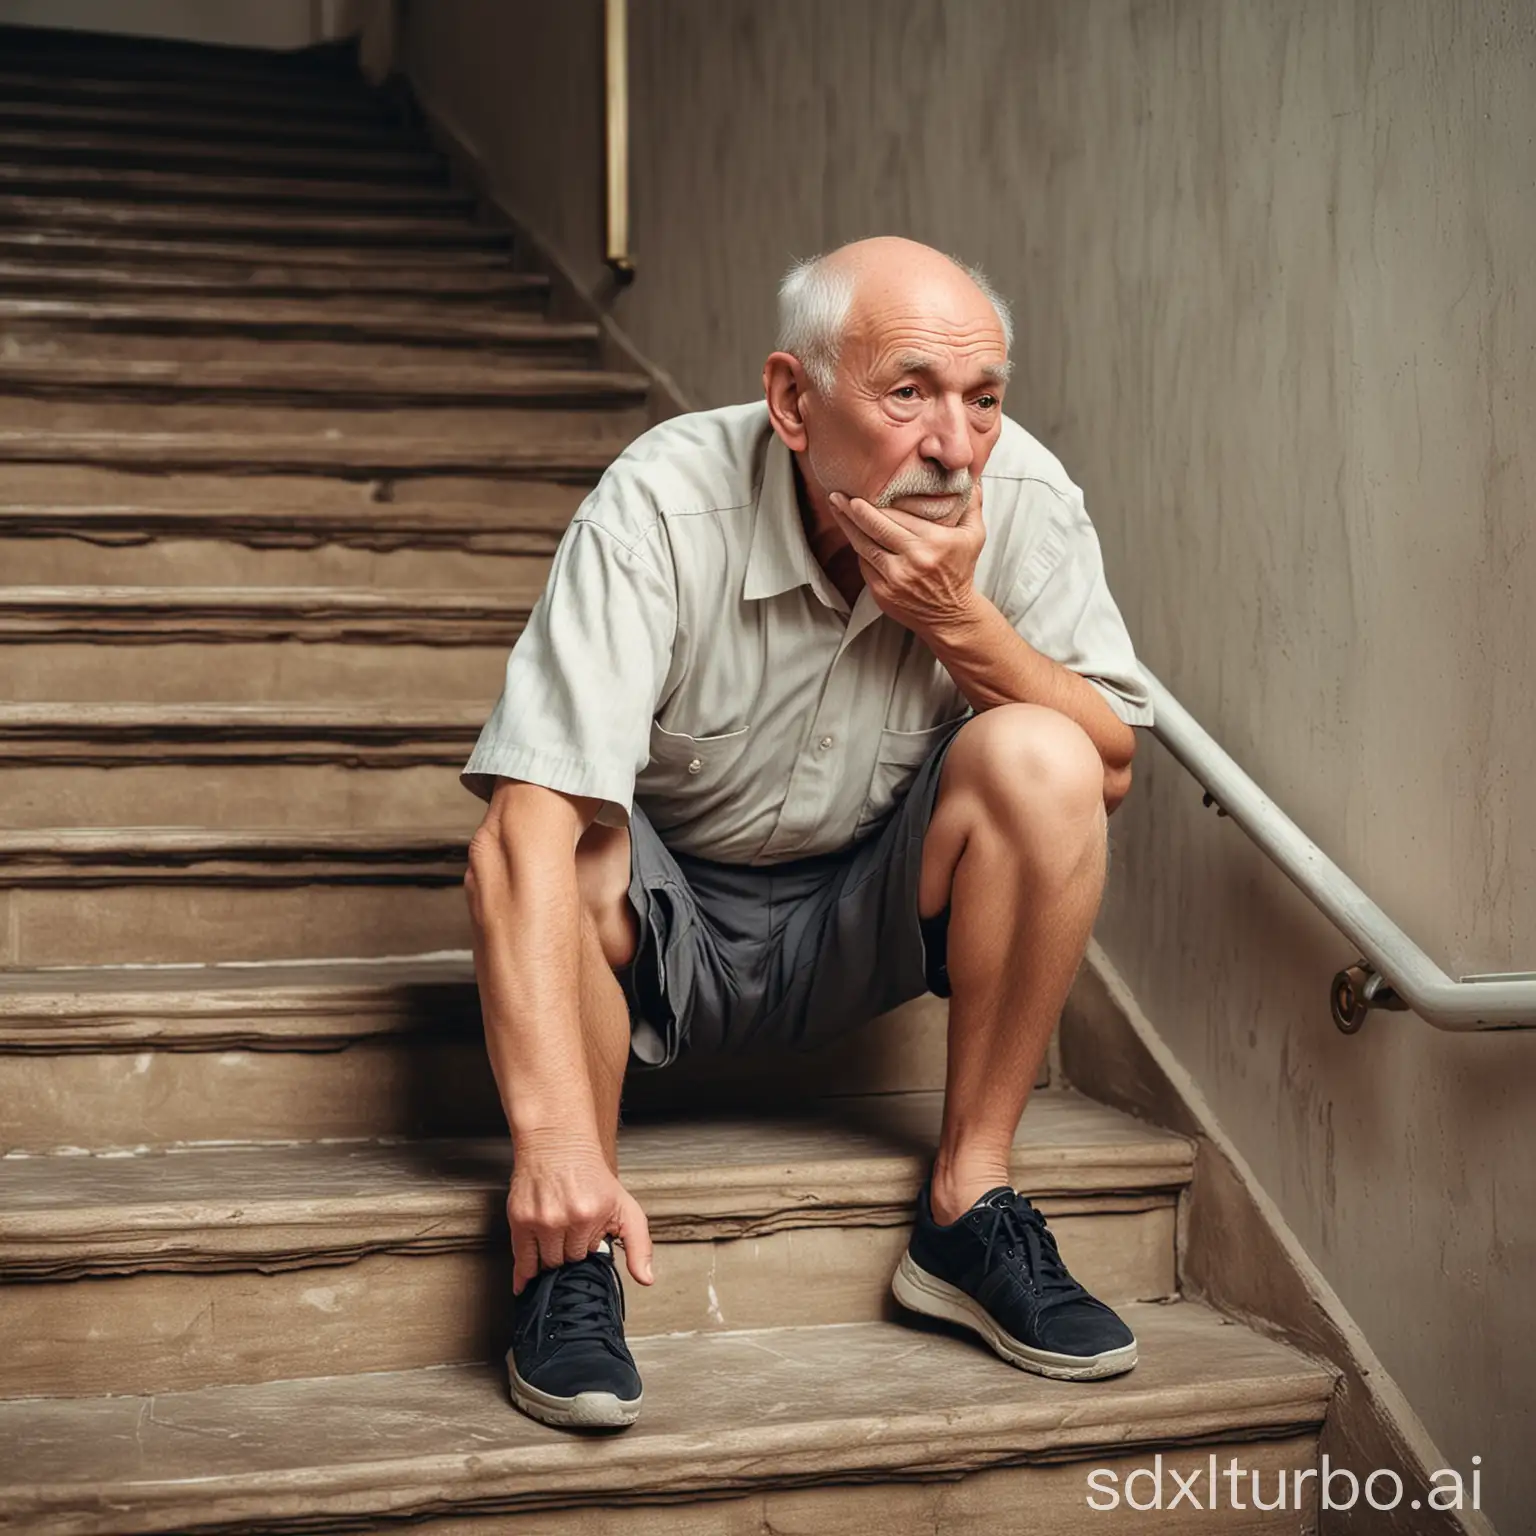 The old man climbs stairs and his knees hurt.